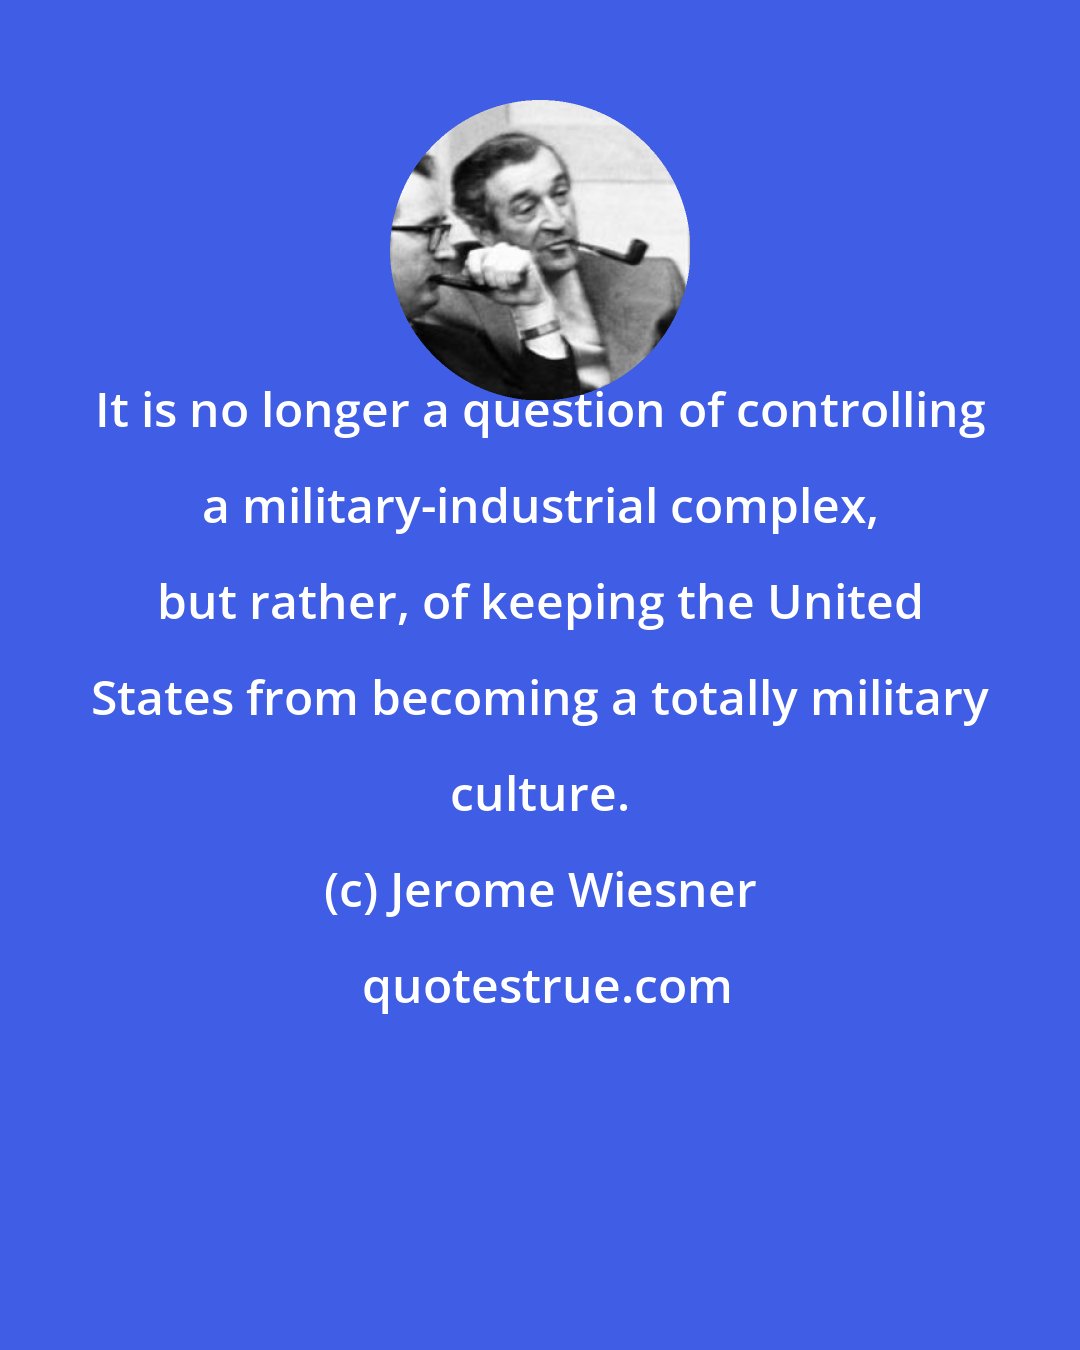 Jerome Wiesner: It is no longer a question of controlling a military-industrial complex, but rather, of keeping the United States from becoming a totally military culture.